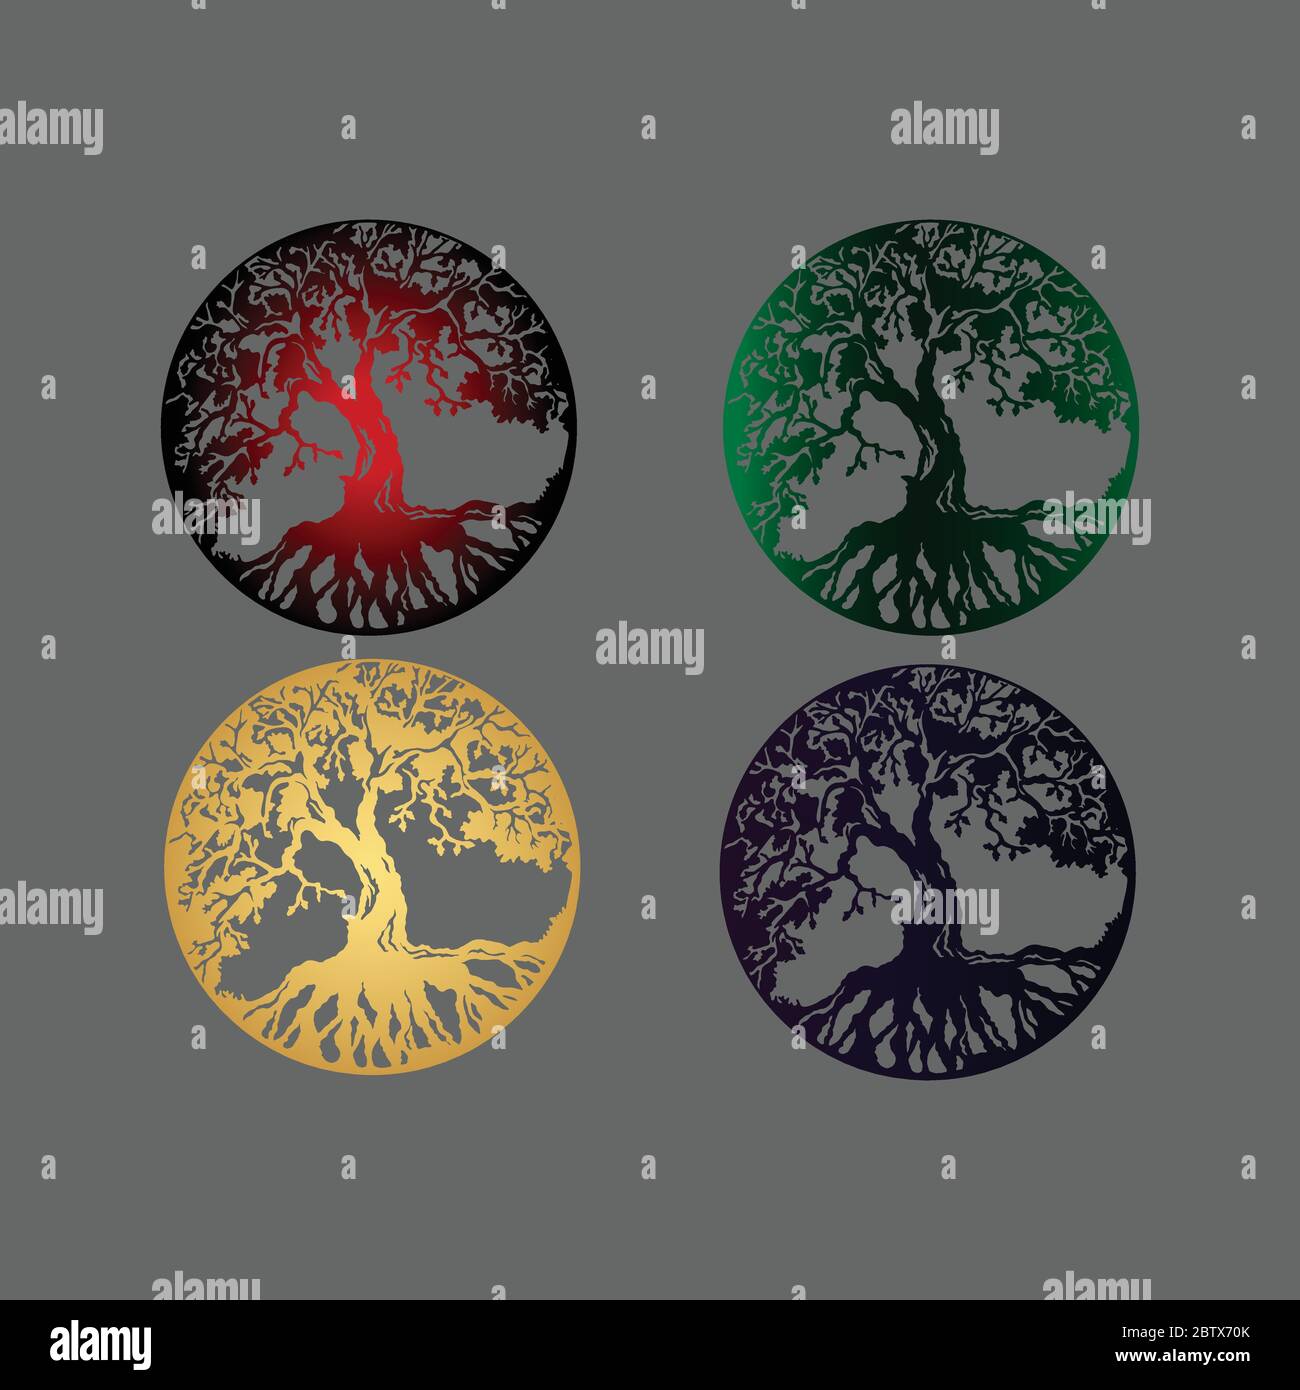 Tree of life vector illustration collection neon gradient design Stock Vector